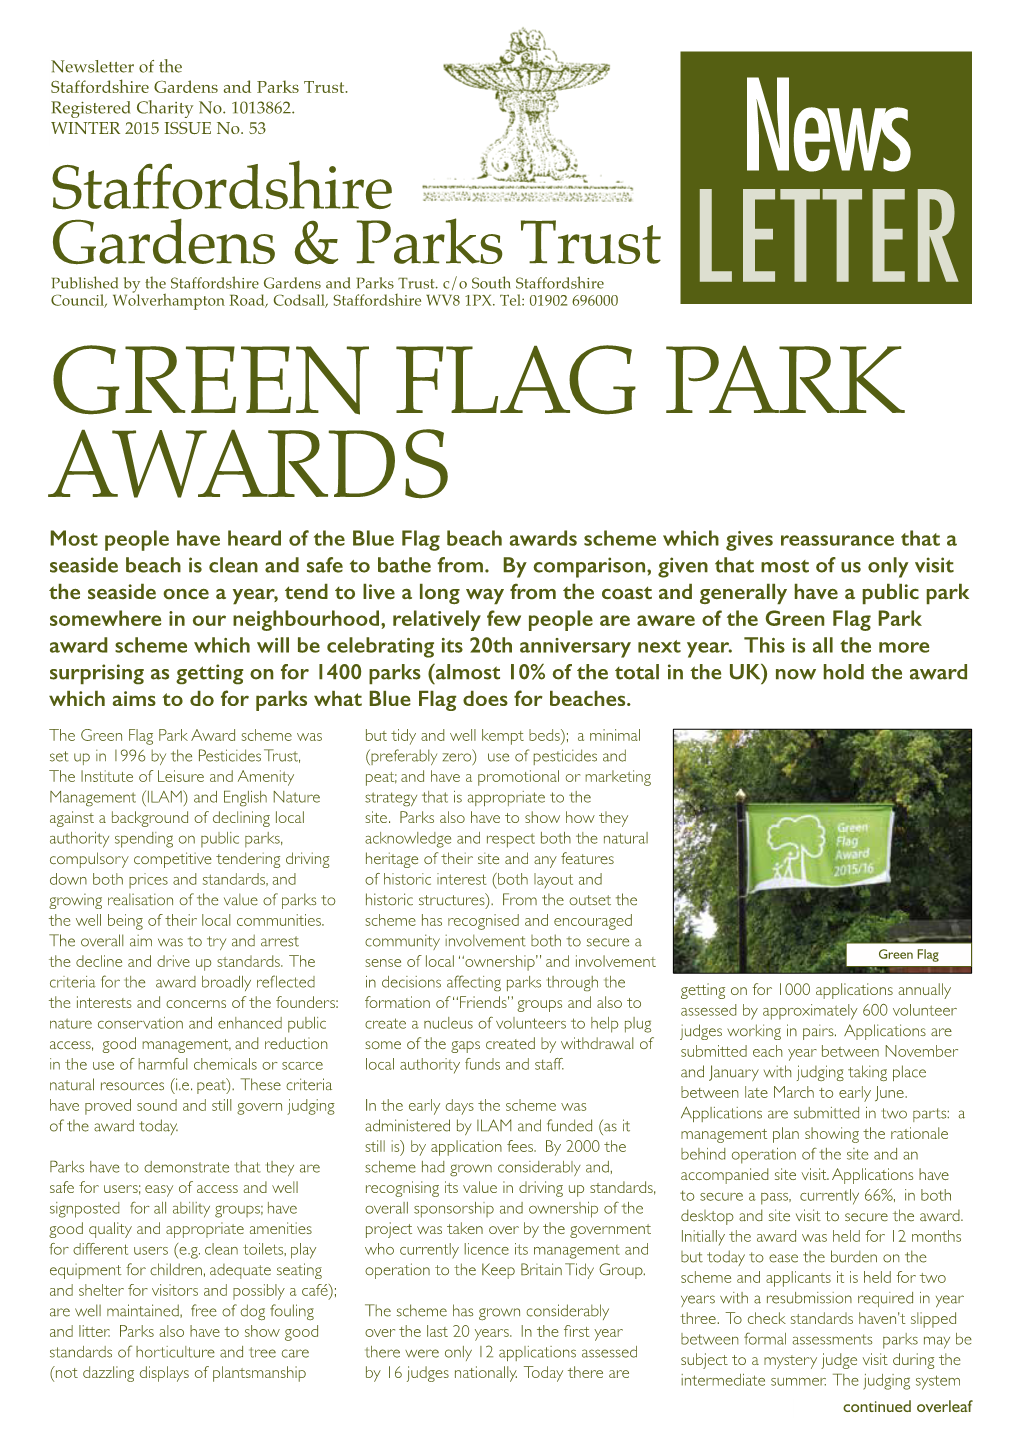 GREEN FLAG PARK AWARDS Most People Have Heard of the Blue Flag Beach Awards Scheme Which Gives Reassurance That a Seaside Beach Is Clean and Safe to Bathe From